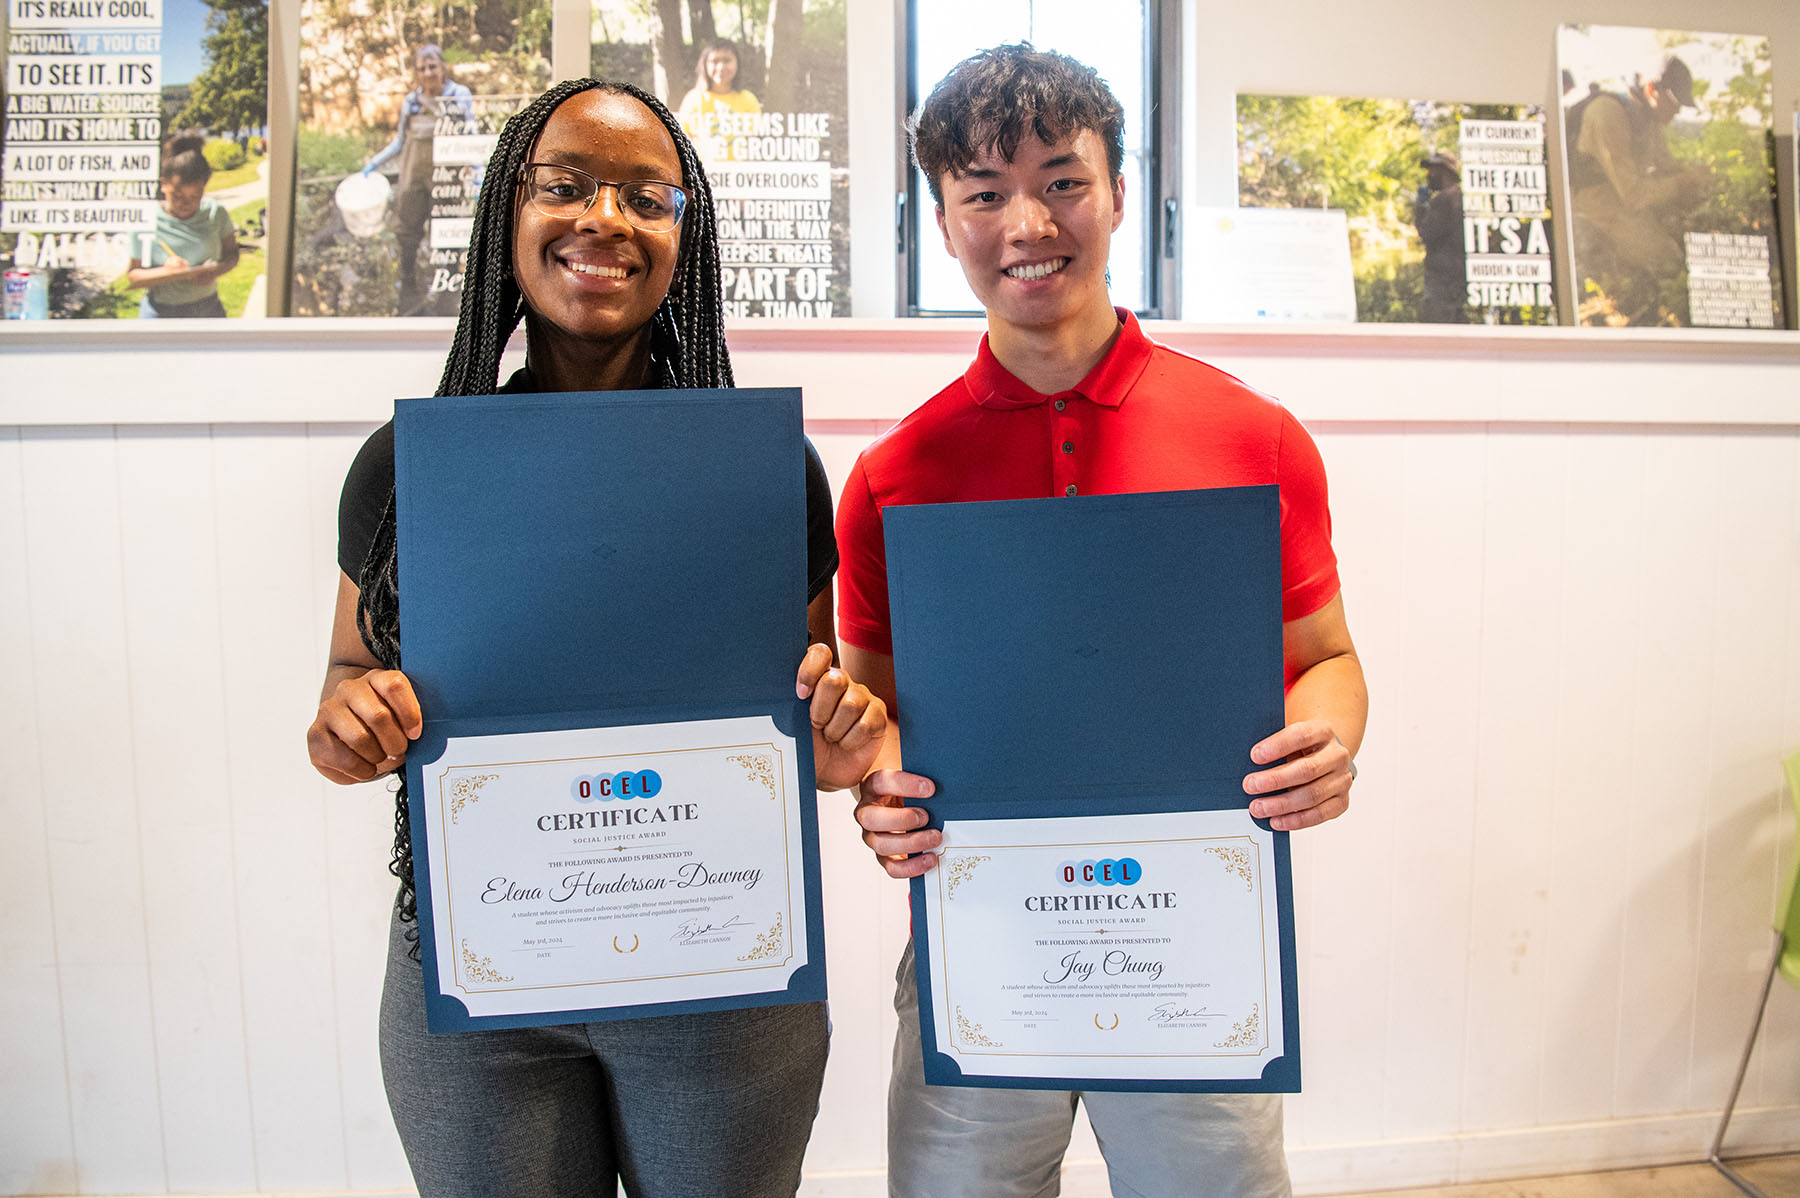 Two people holding diploma/awards and smiling.